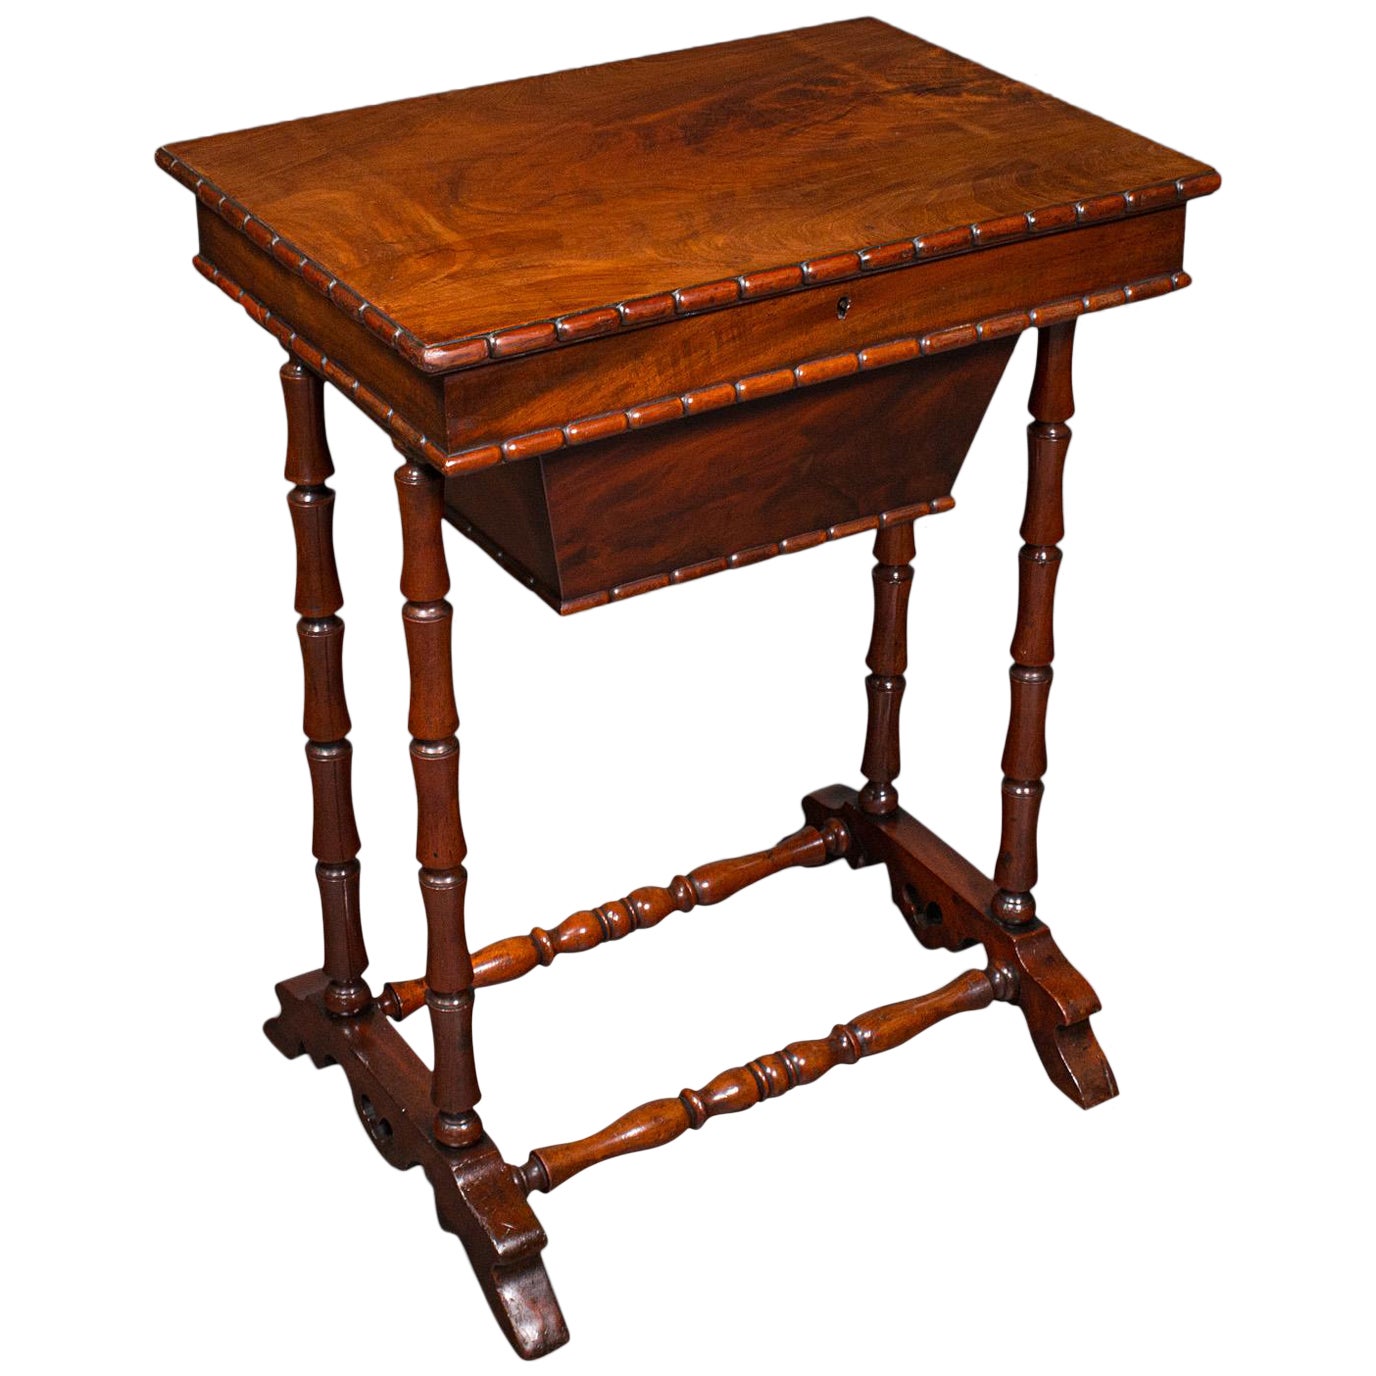 Small Antique Sewing Table, English, Flame, Ladies, Work, Regency, Circa 1830 For Sale